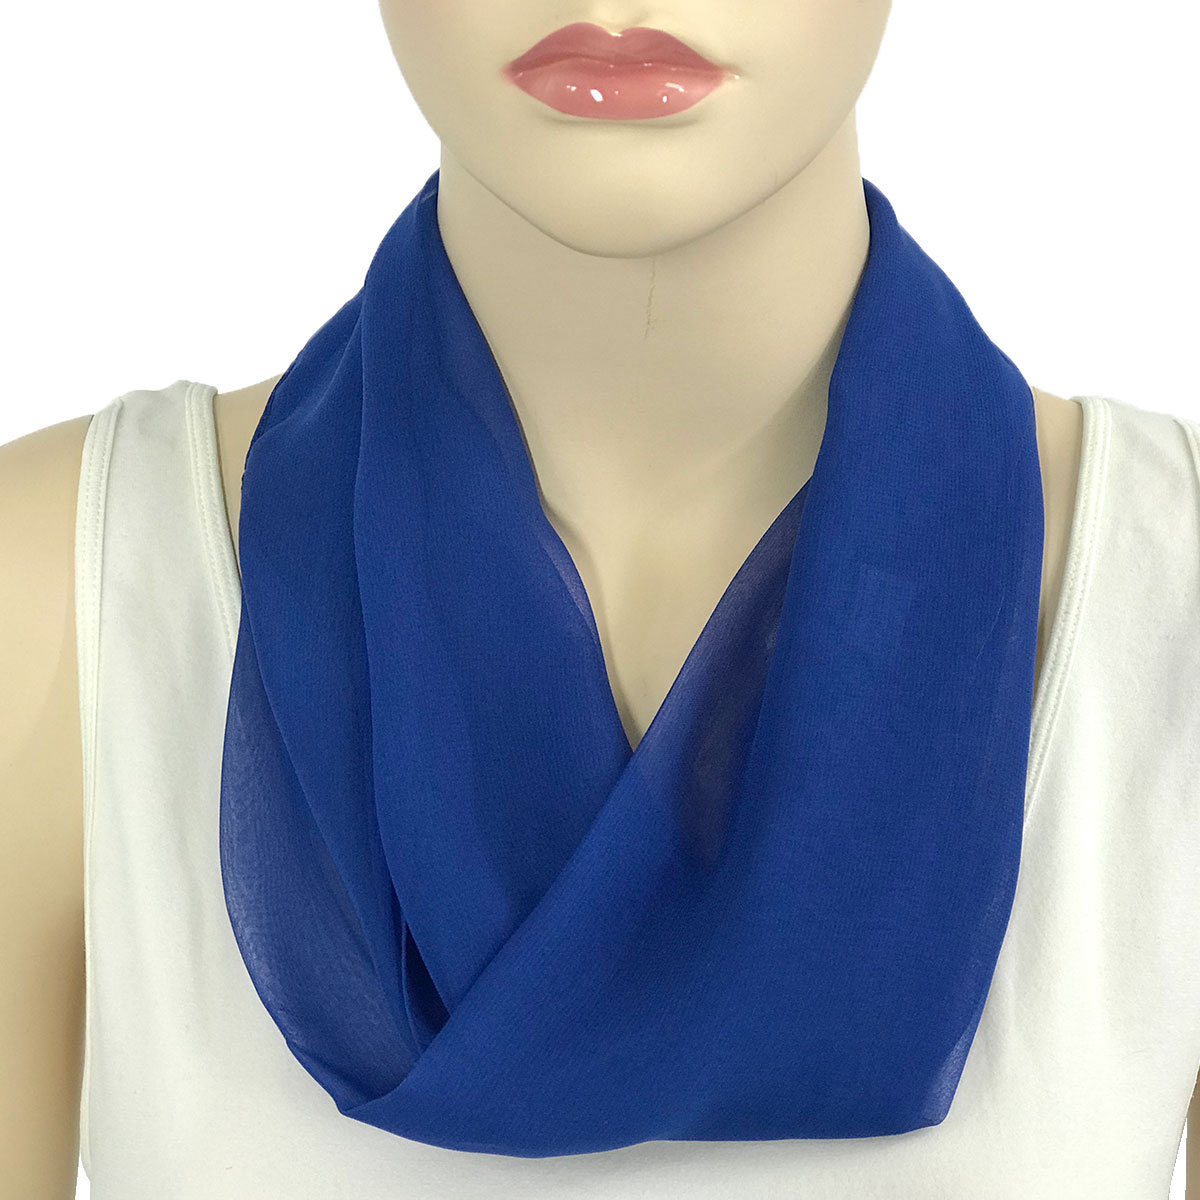 SRO - Solid Royal<br>
Magnetic Clasp Silky Dress Scarf